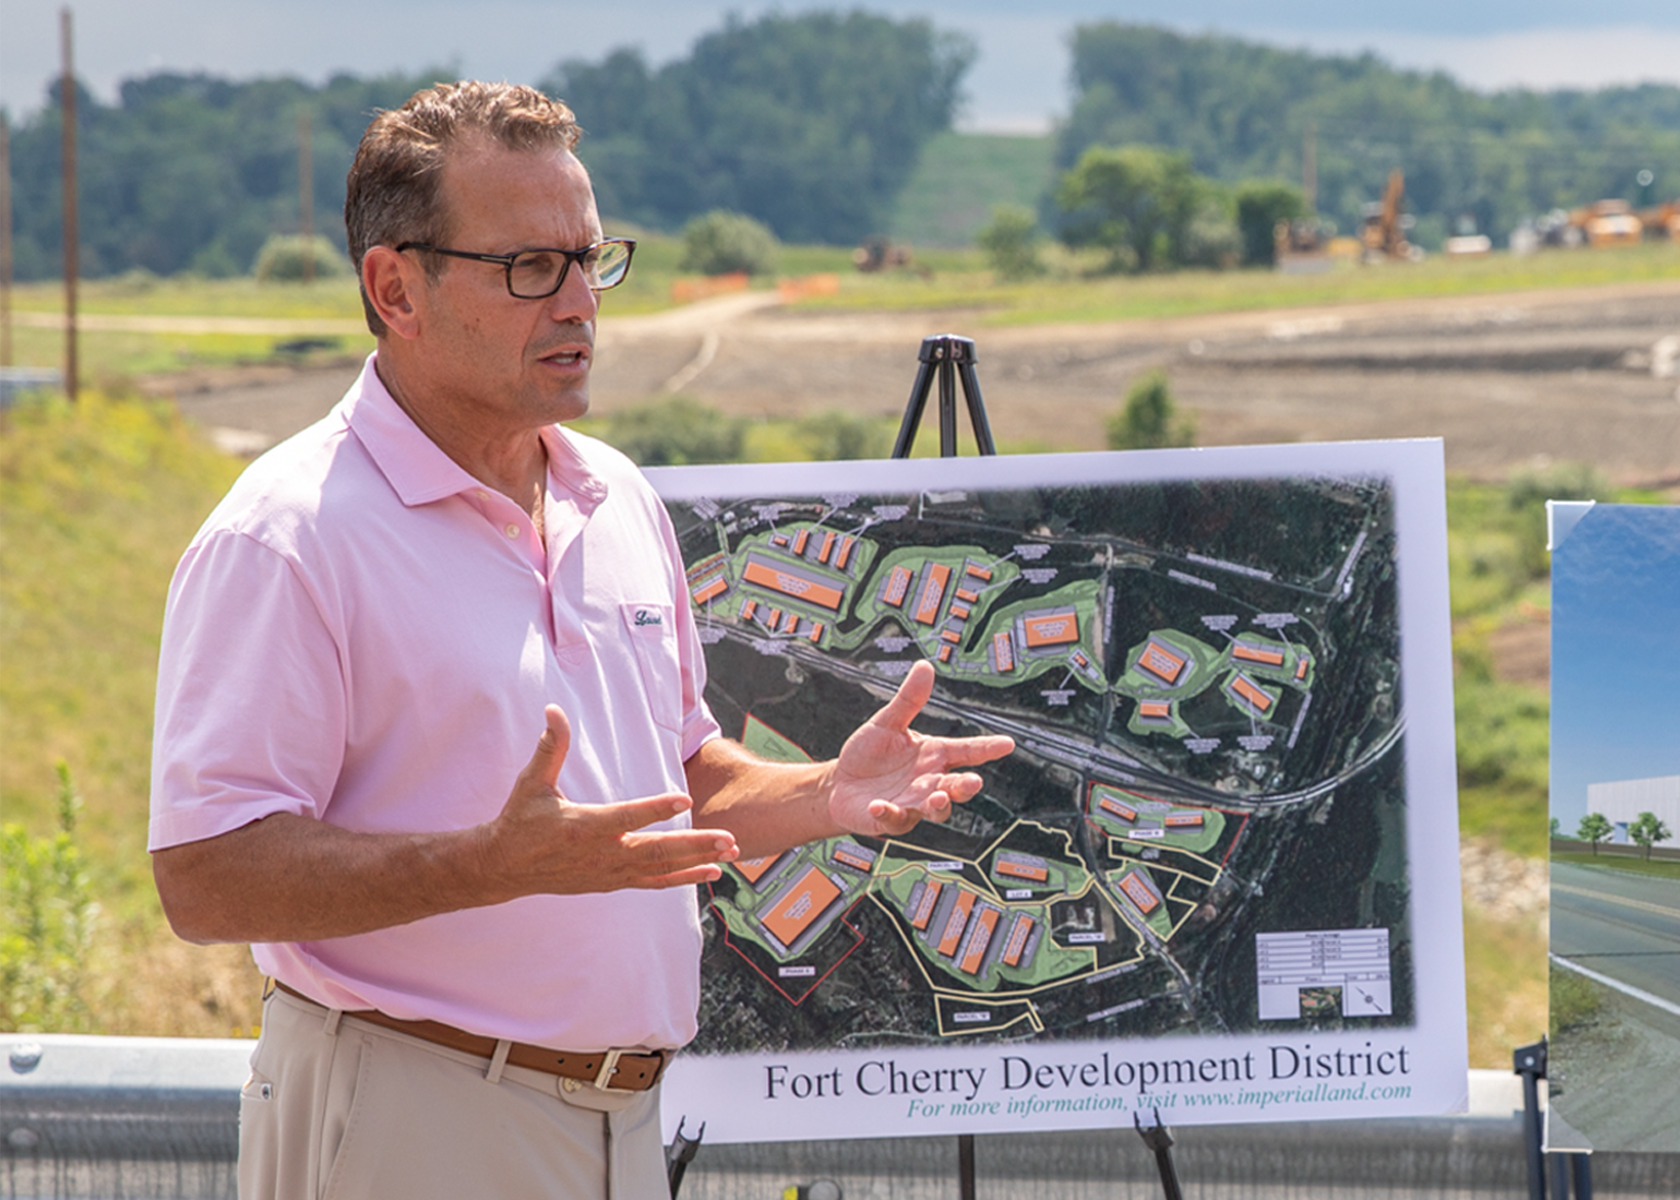 jim scalo speaking to a group presenting the fort cherry development district plans on an easel